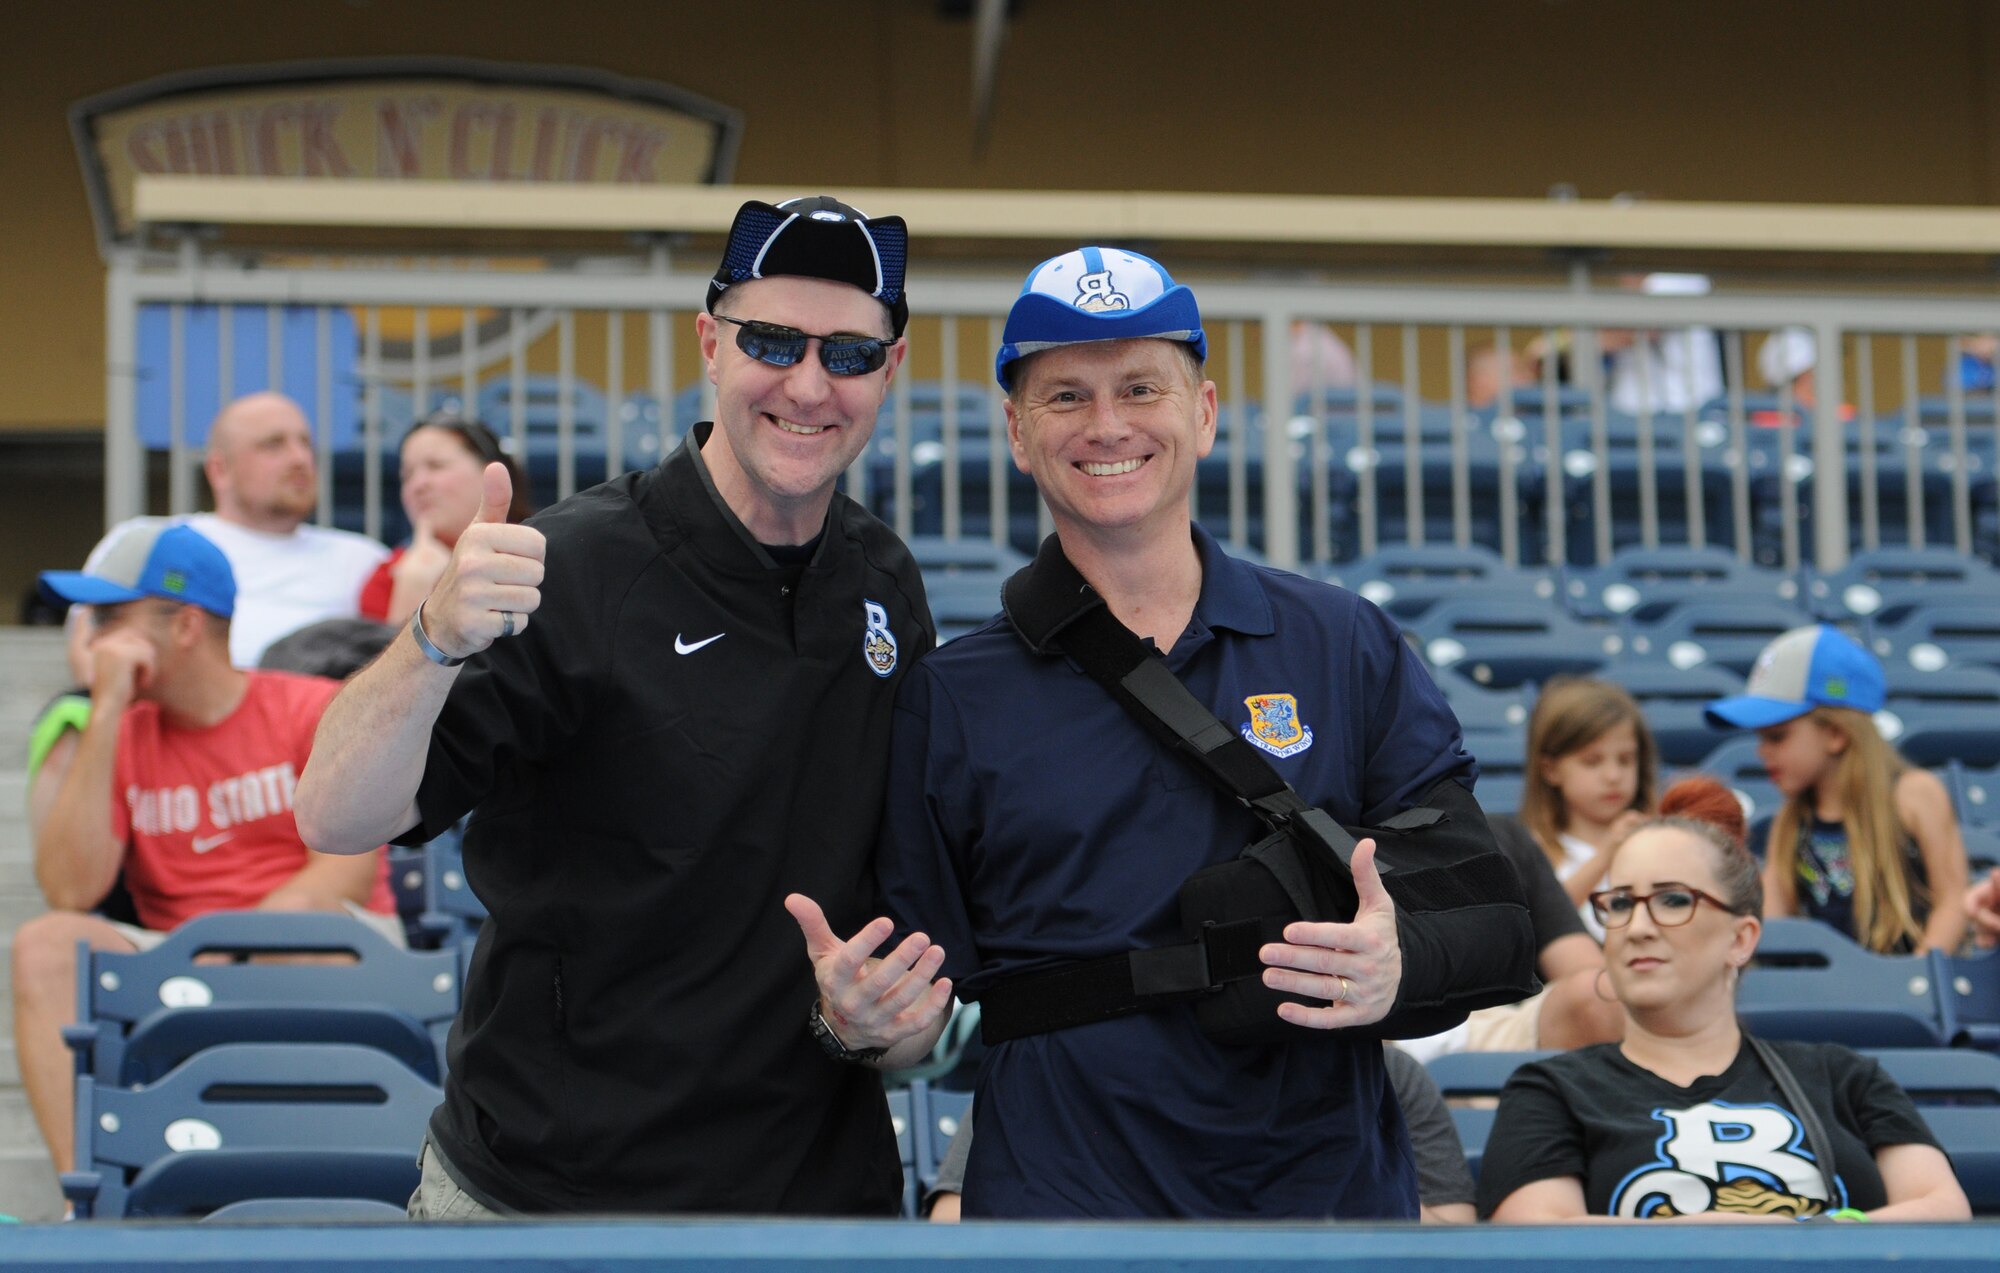 Maj. Michael Manning, 81st Training Support Squadron commander, and Col. Dennis Scarborough, 81st Training Wing vice commander, put their “rally caps” on during the “Boots versus Badges” softball game at the Biloxi Shuckers MGM Park April 21, 2016, Biloxi, Miss. The game was the kickoff event for the 2016 Special Olympics Mississippi Summer Games, which will be hosted by Keesler Air Force Base, Miss., May 20-21. (U.S. Air Force photo by Kemberly Groue)